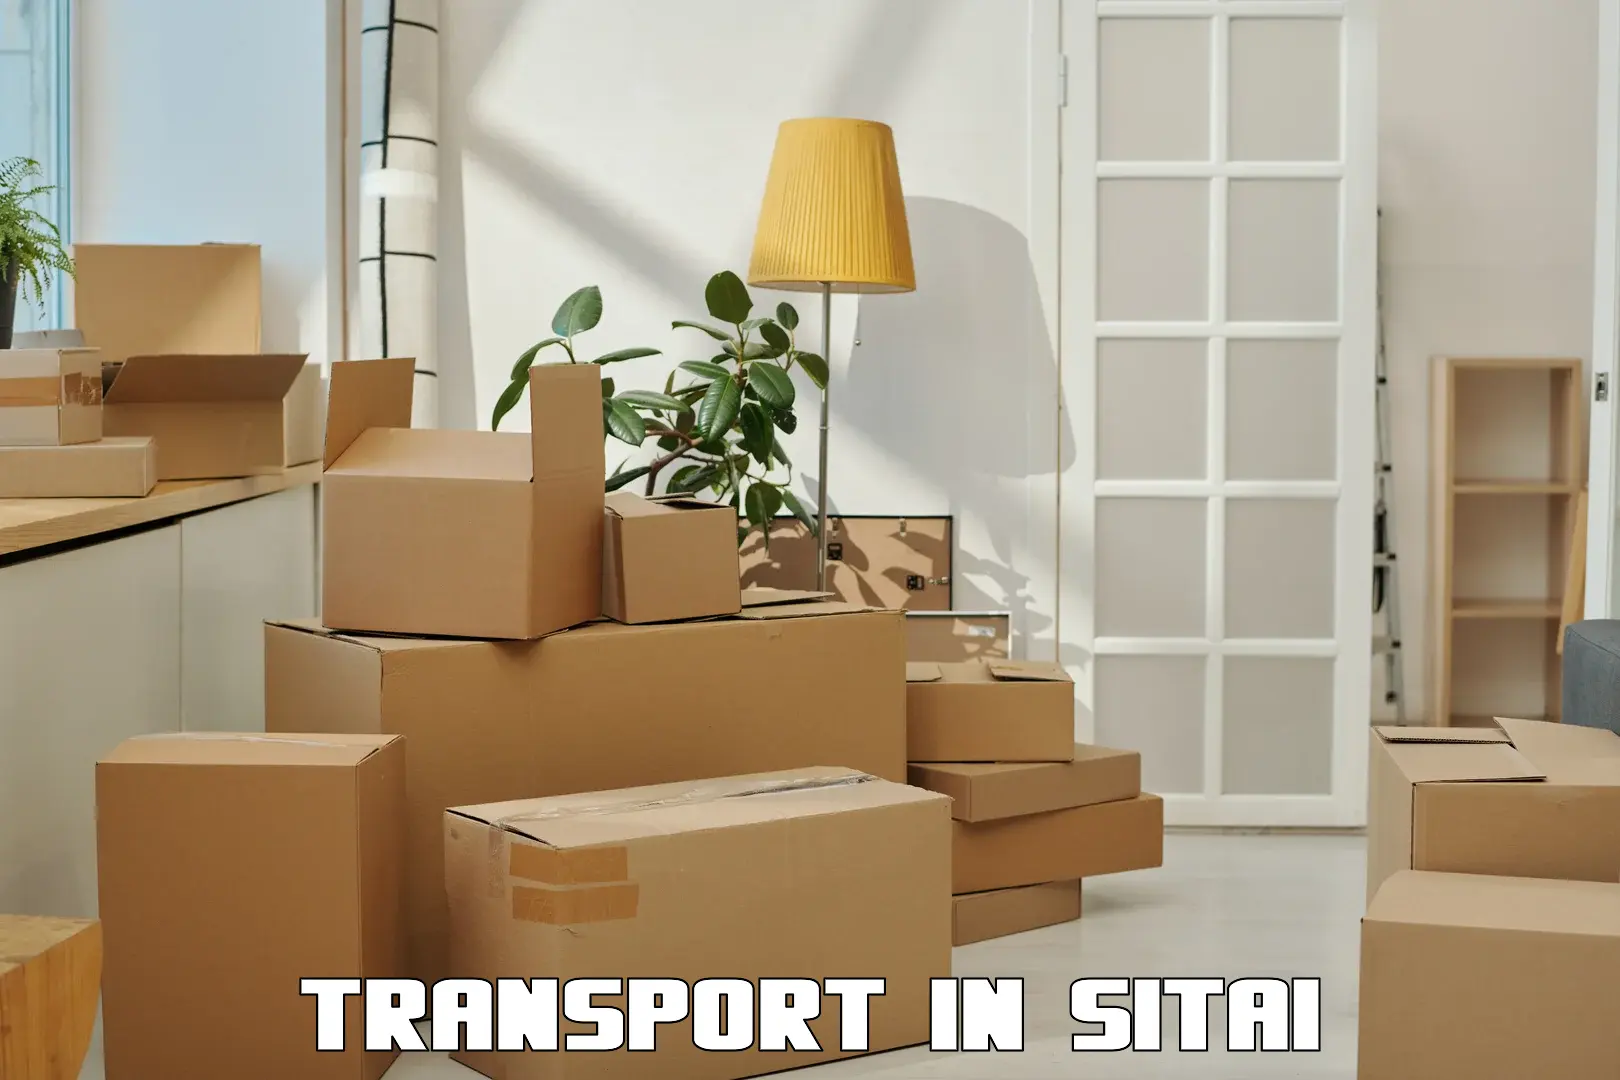 Nearby transport service in Sitai